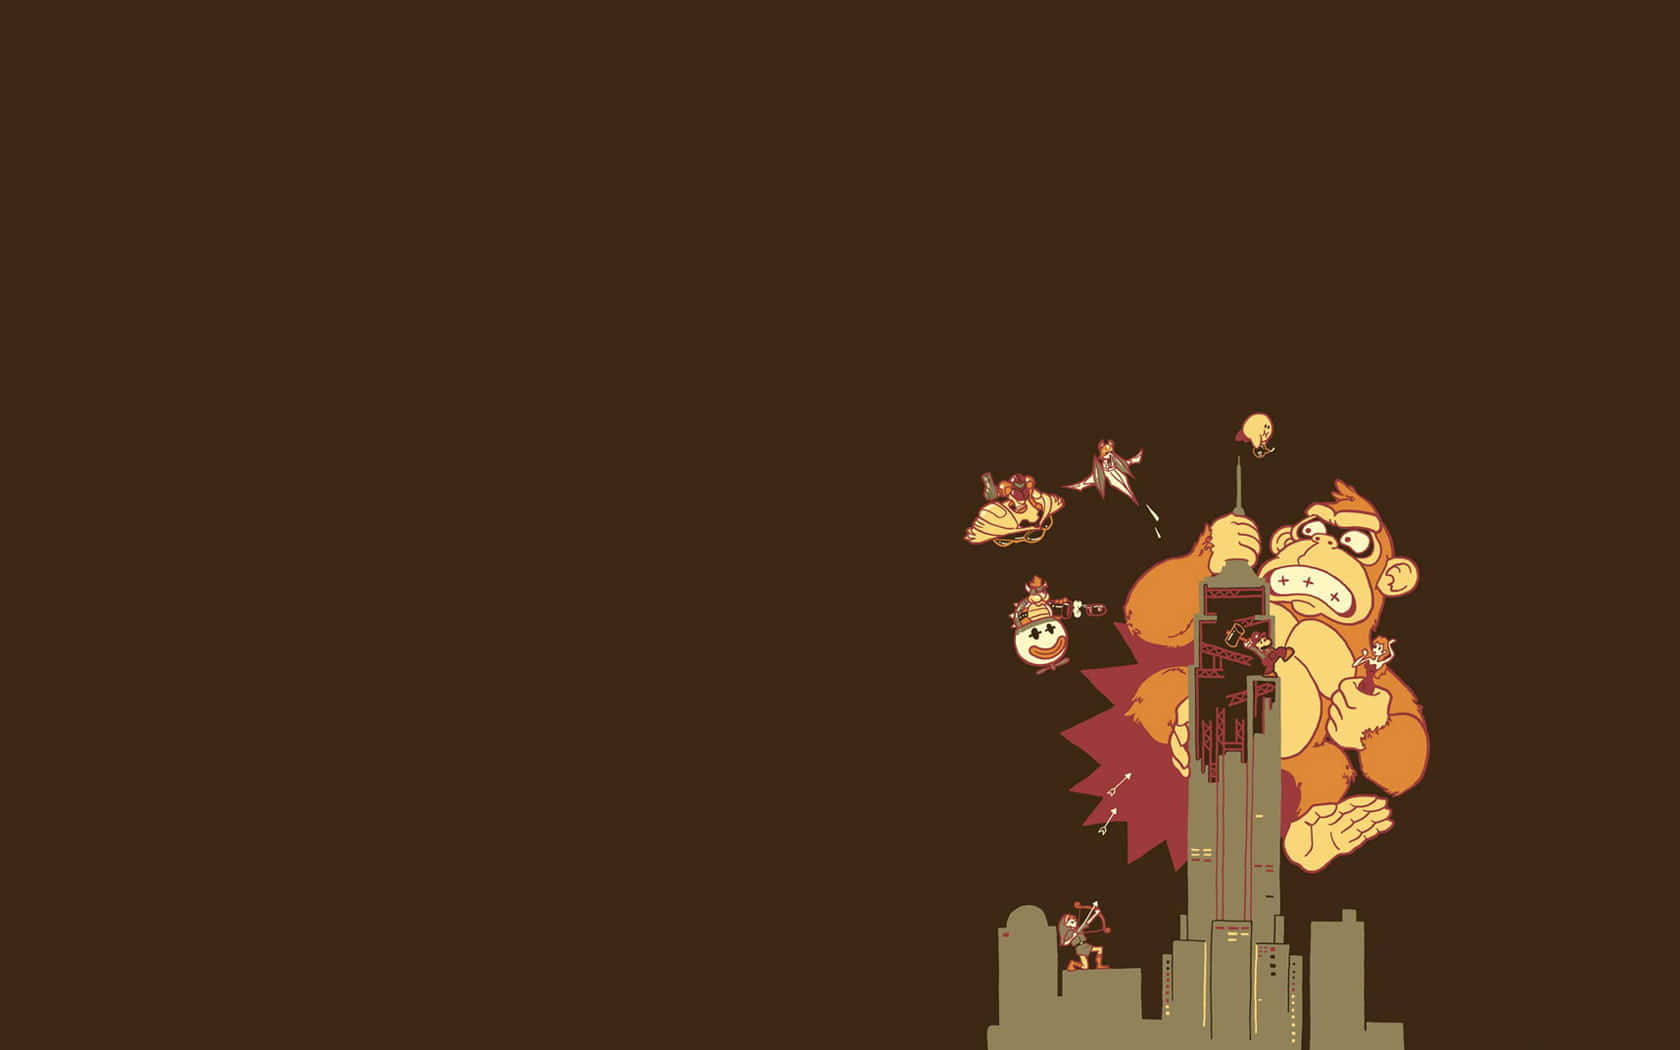 Caption: Donkey Kong And Diddy Kong In Action Wallpaper